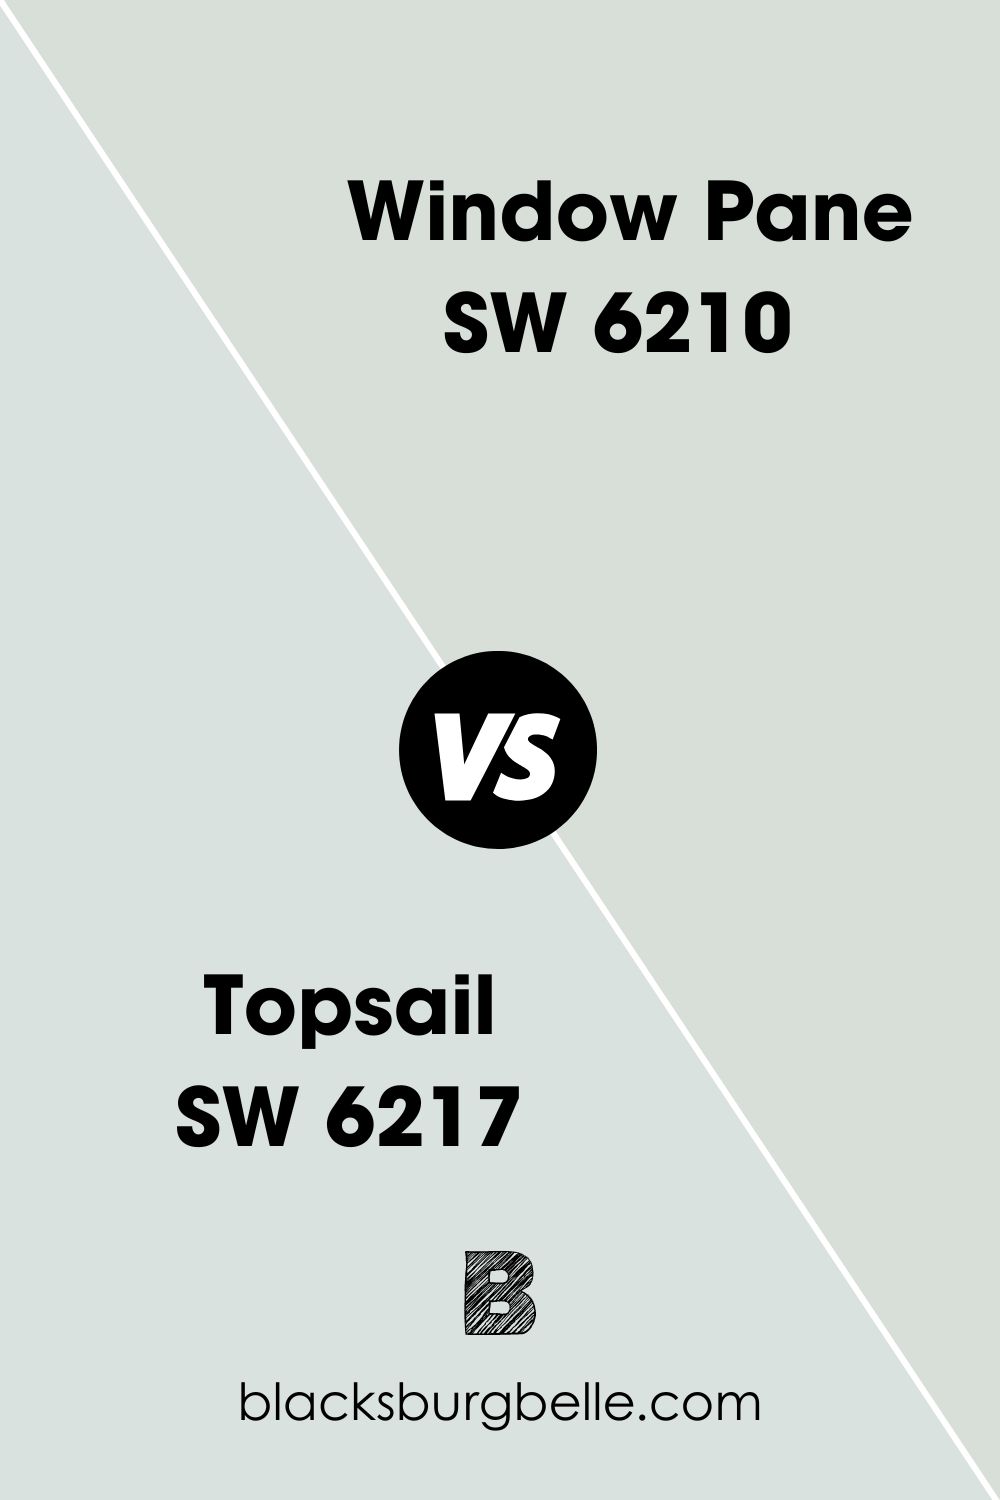 Topsail SW 6217